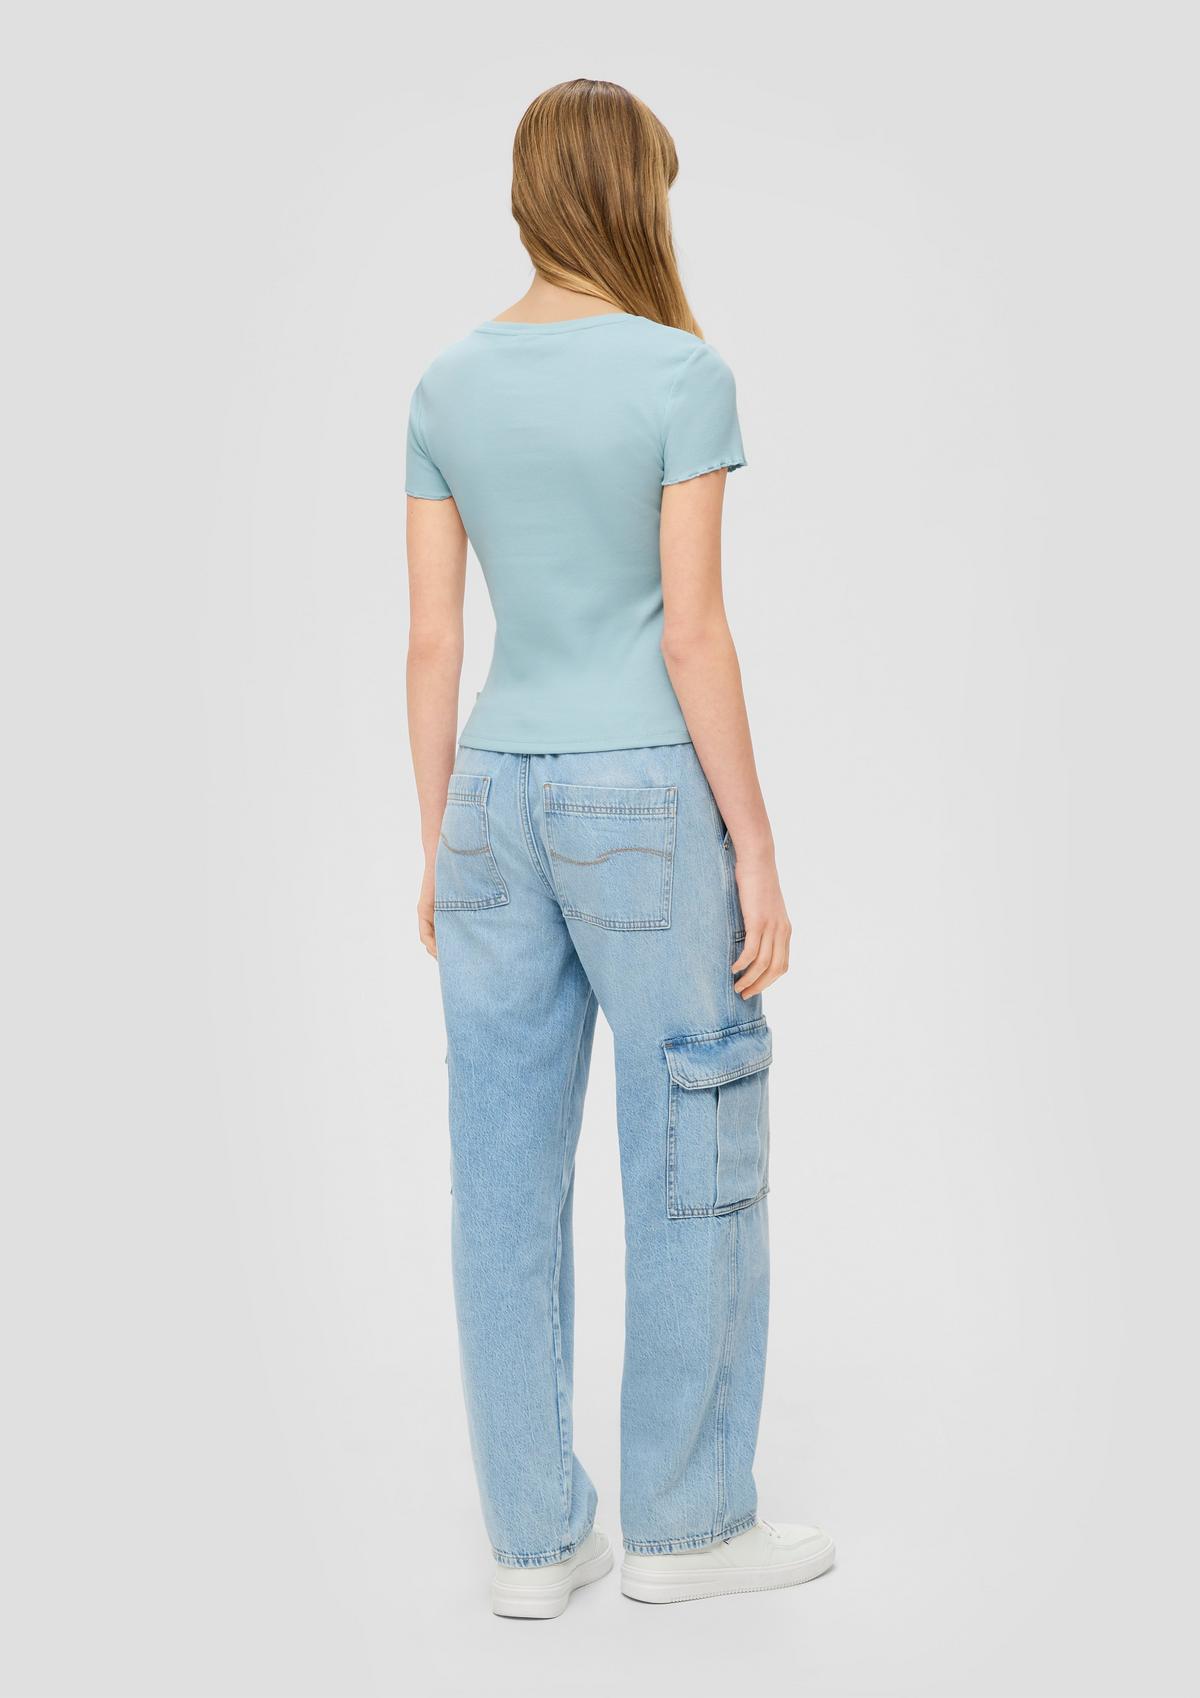 s.Oliver Cropped top with a ribbed texture